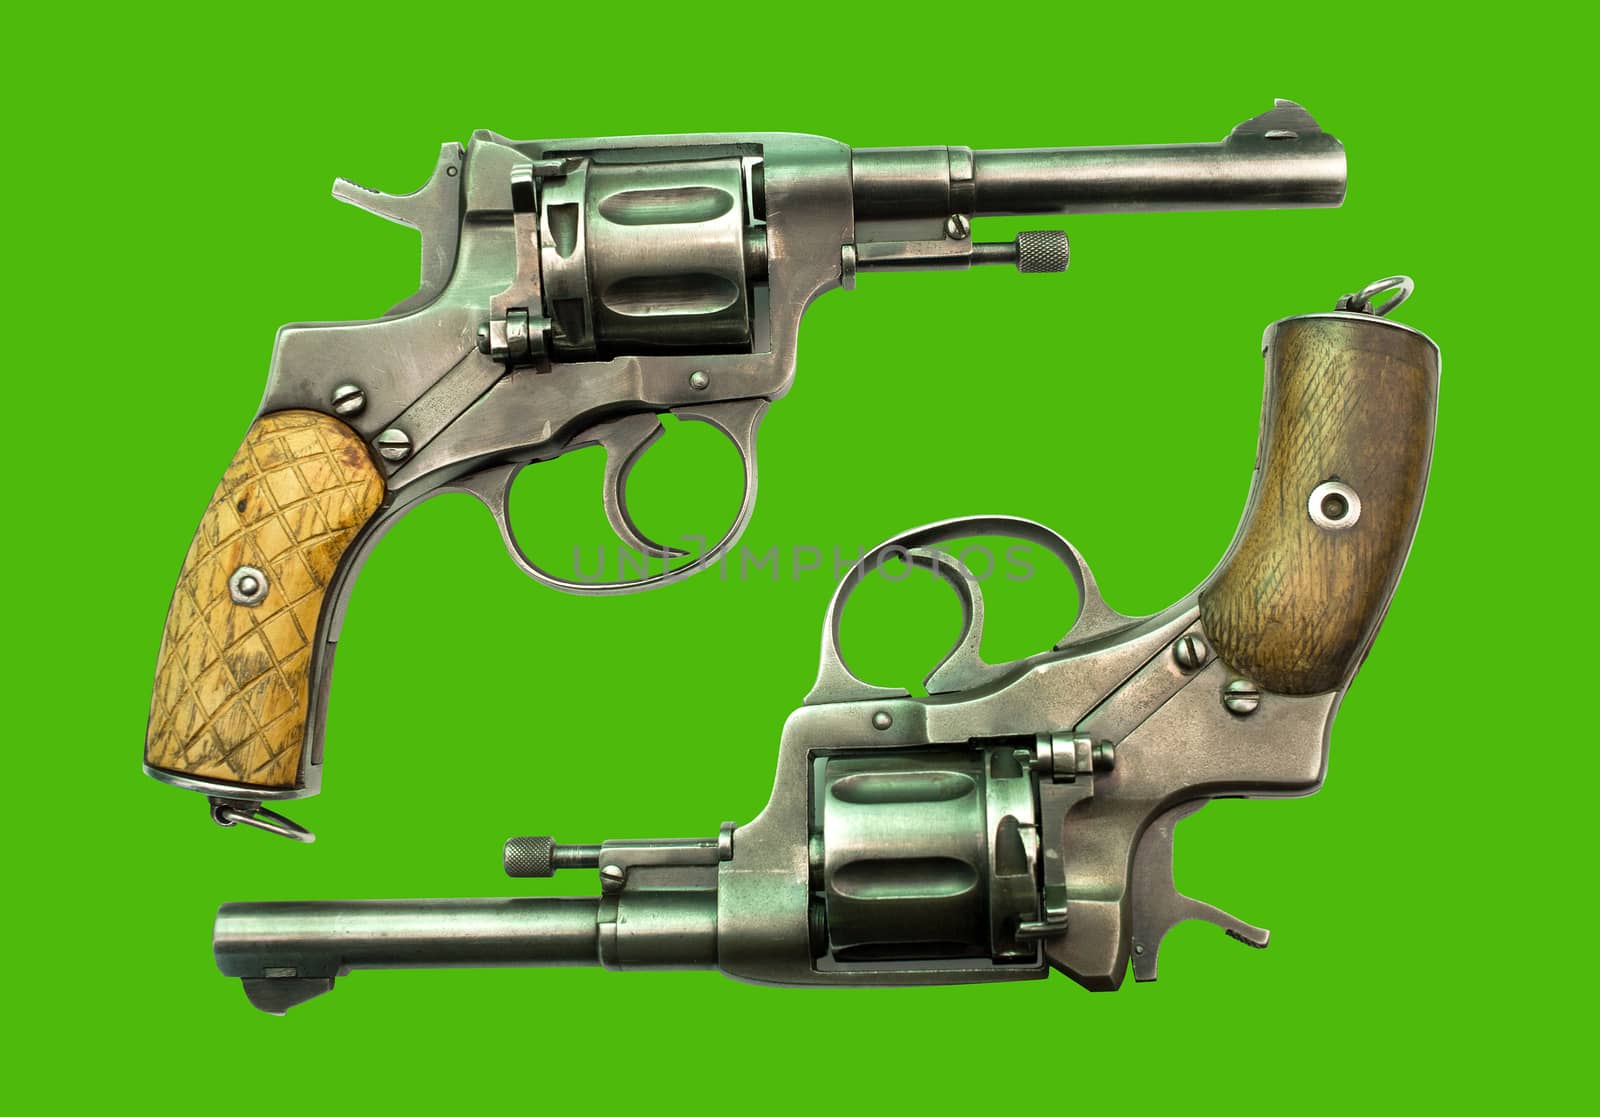 Revolver on a green background by Krakatuk